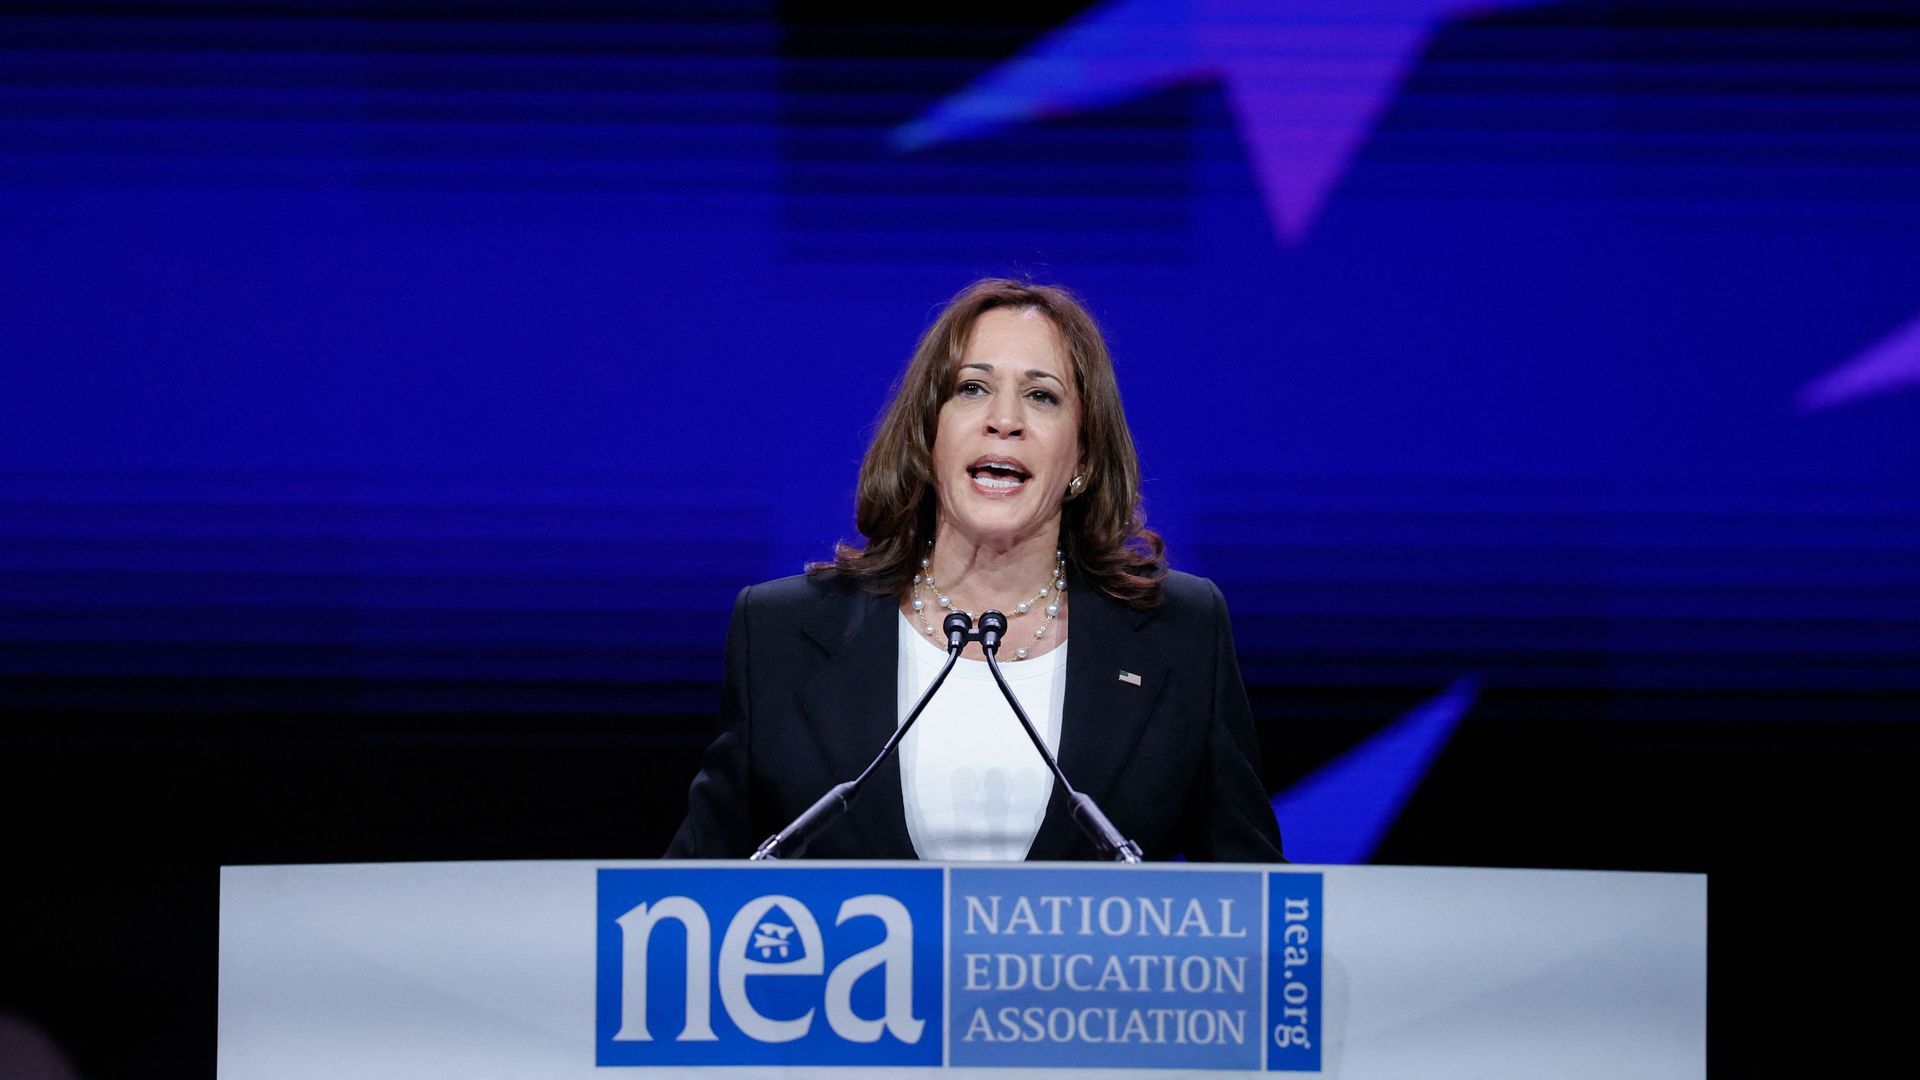 Photo of Kamala Harris speaking from a podium that has a sign says "National Education Association"